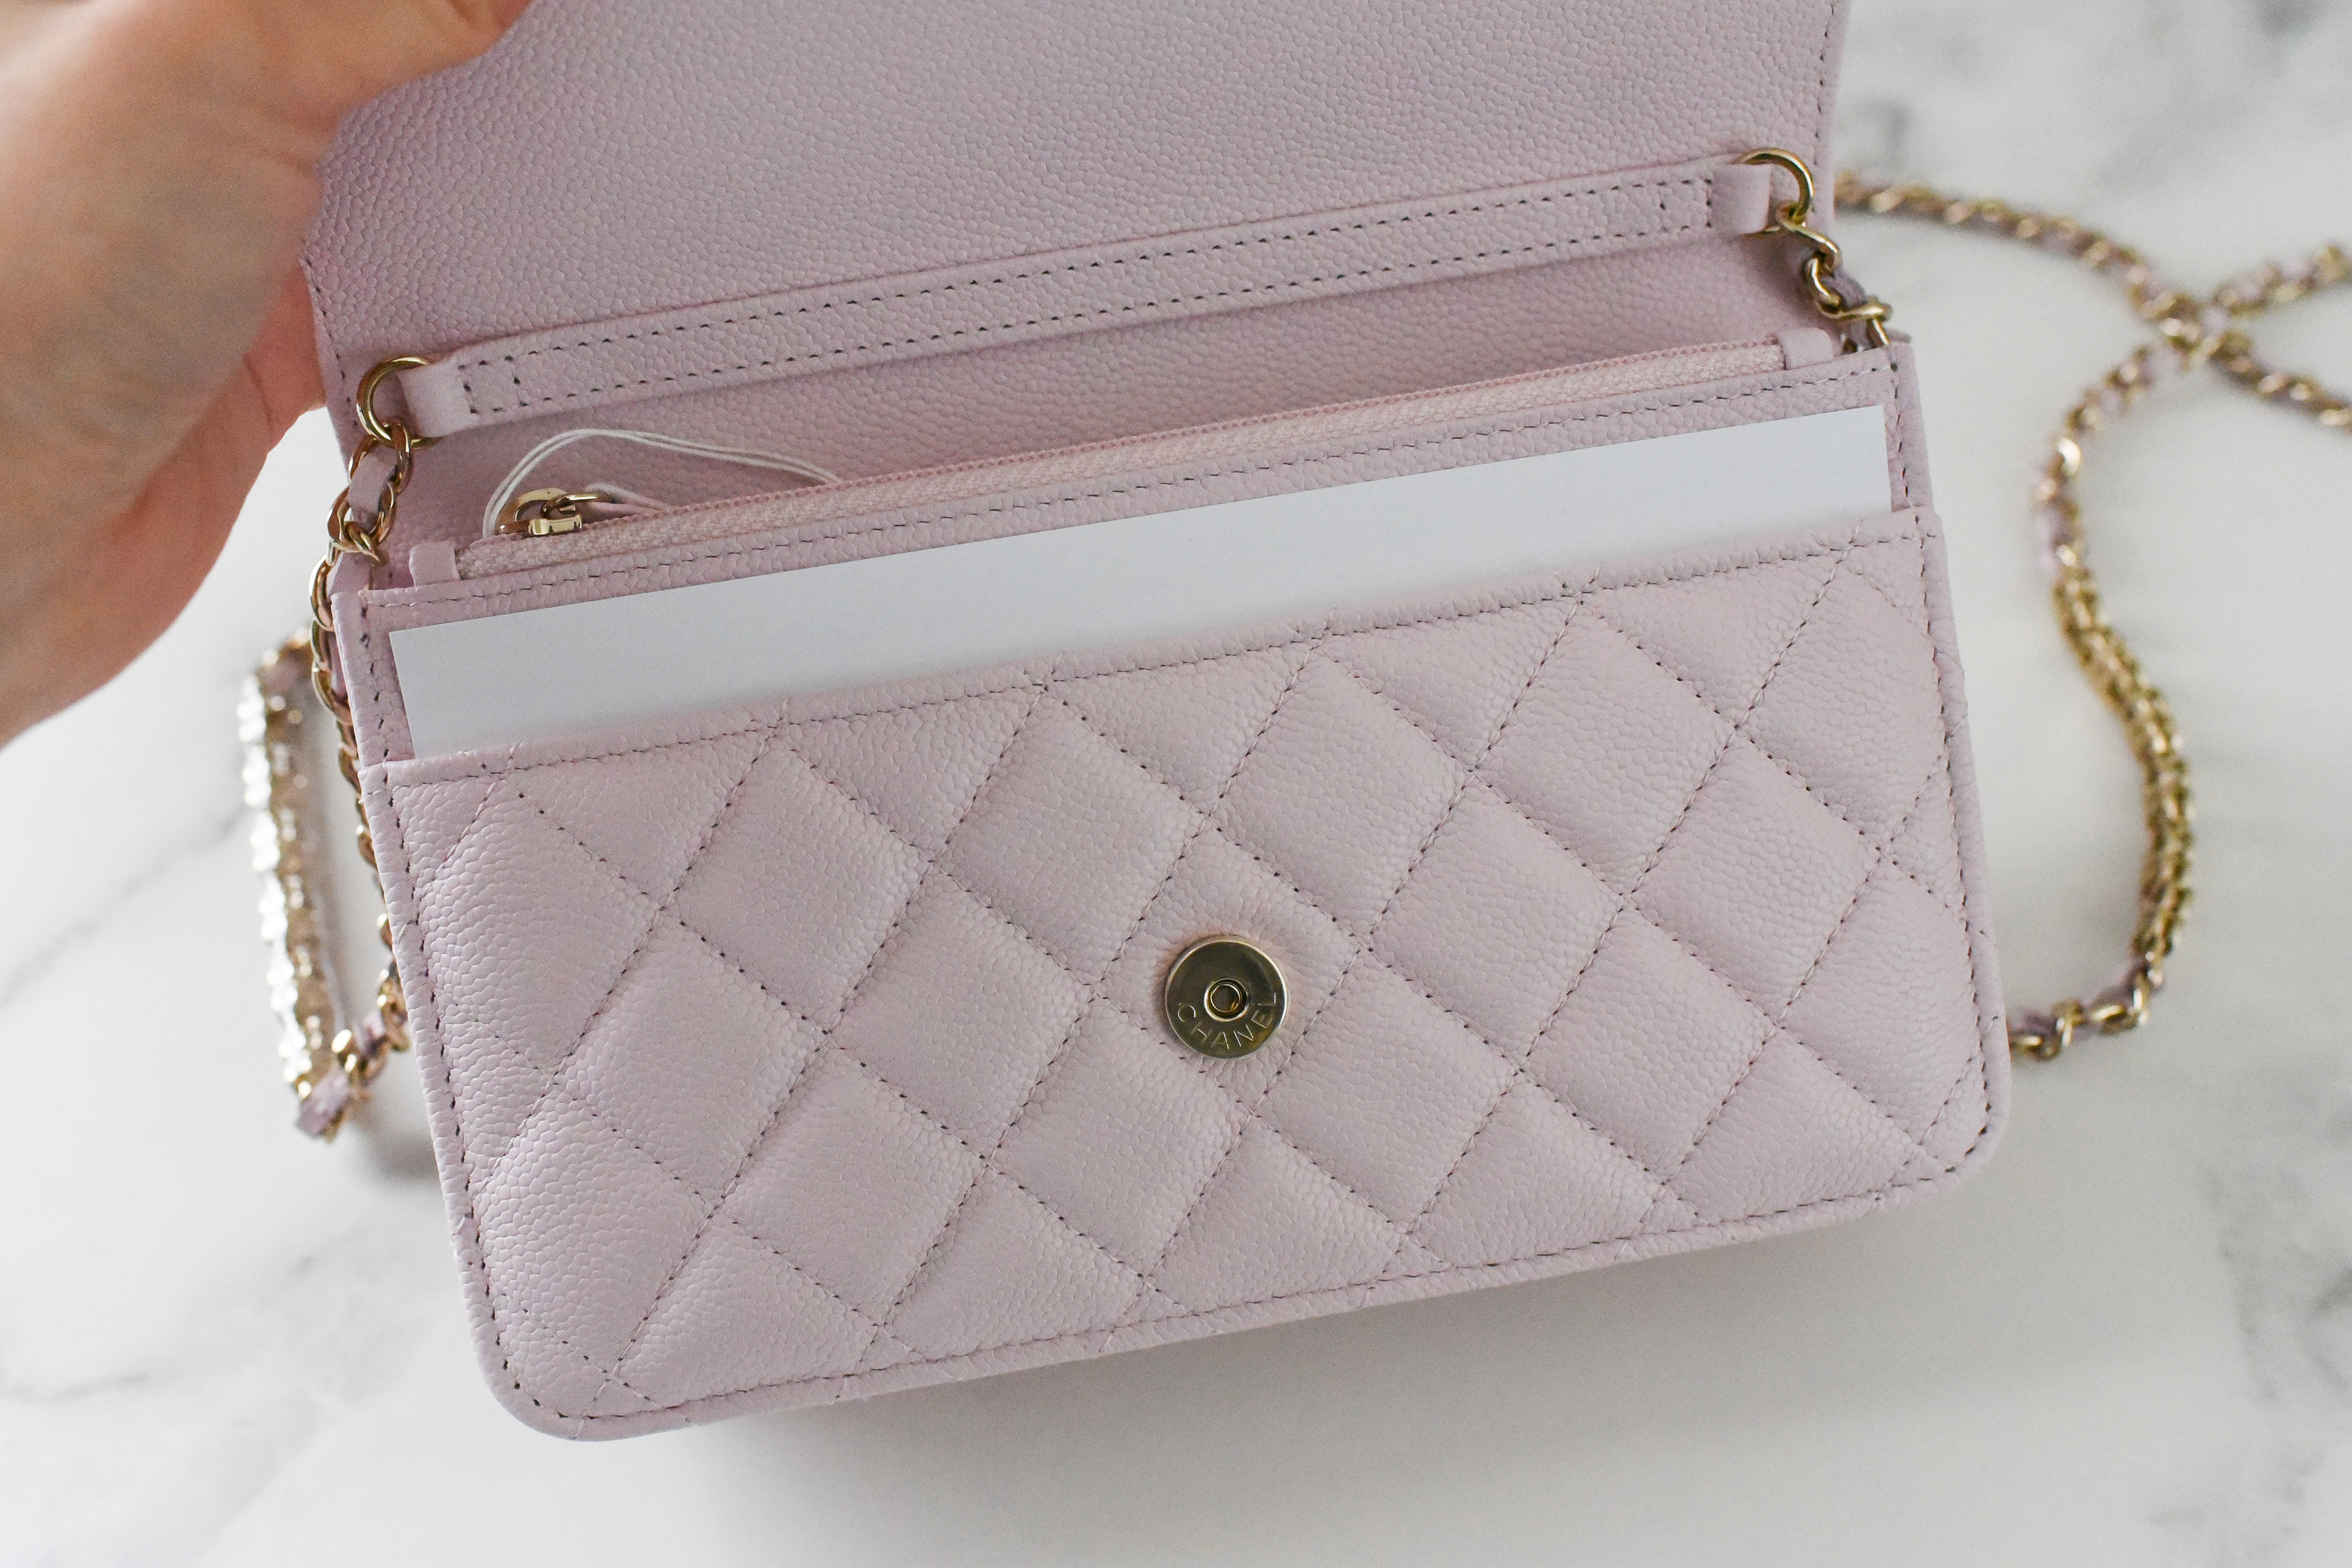 Chanel Wallet on Chain, Pink Caviar Leather with CC Chain, Gold Hardware,  New in Box GA001 - Julia Rose Boston